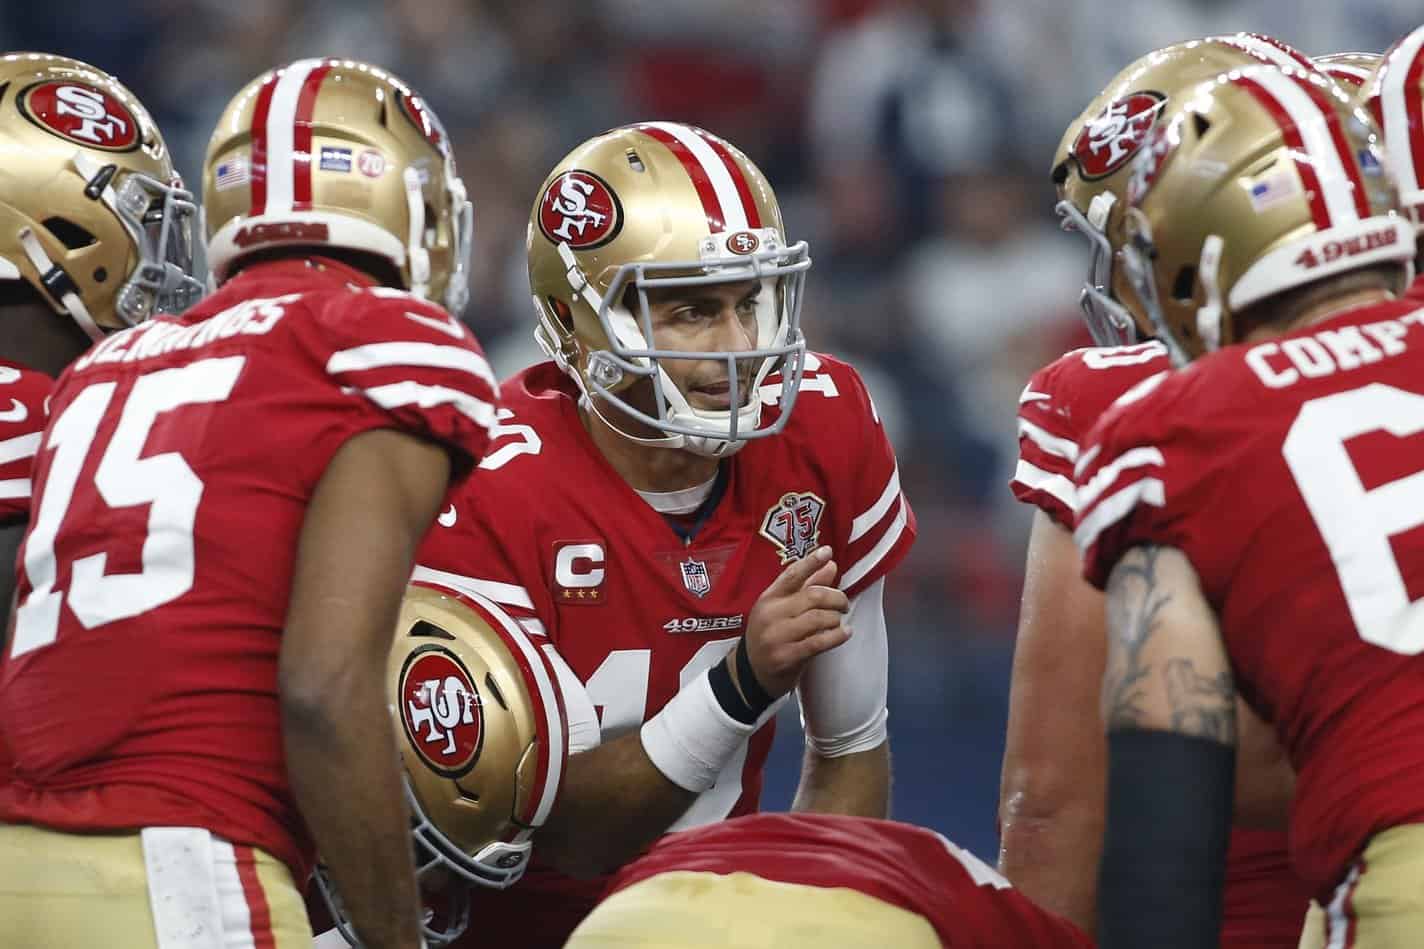 Rams finish out Jimmy Garoppolo, beat 49ers to set up home game Super Bowl  - The Boston Globe